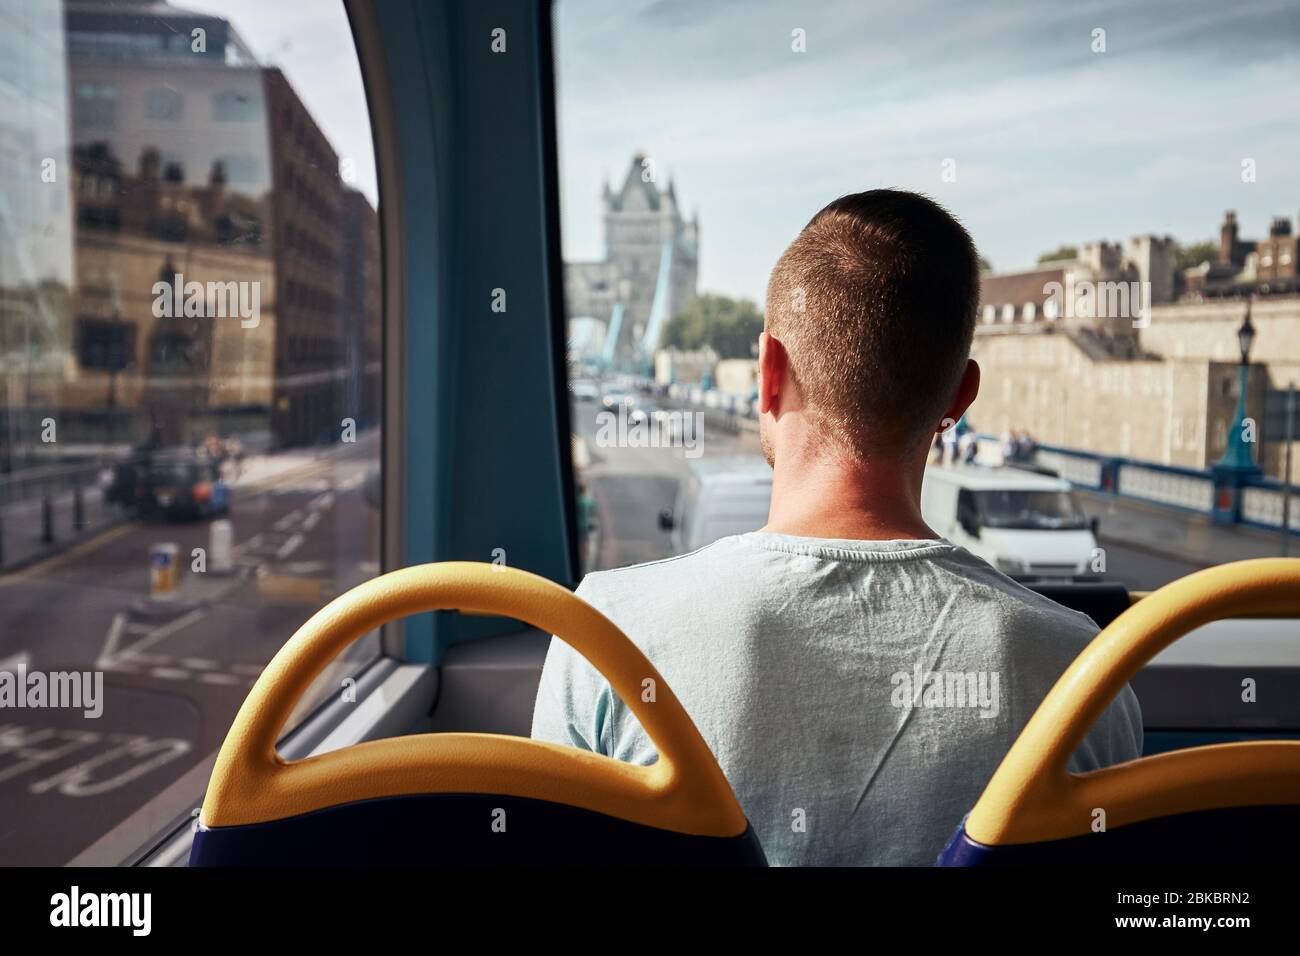 Man traveling by double decker bus against Tower Bridge. City street in London, United Kingdom. Stock Photo